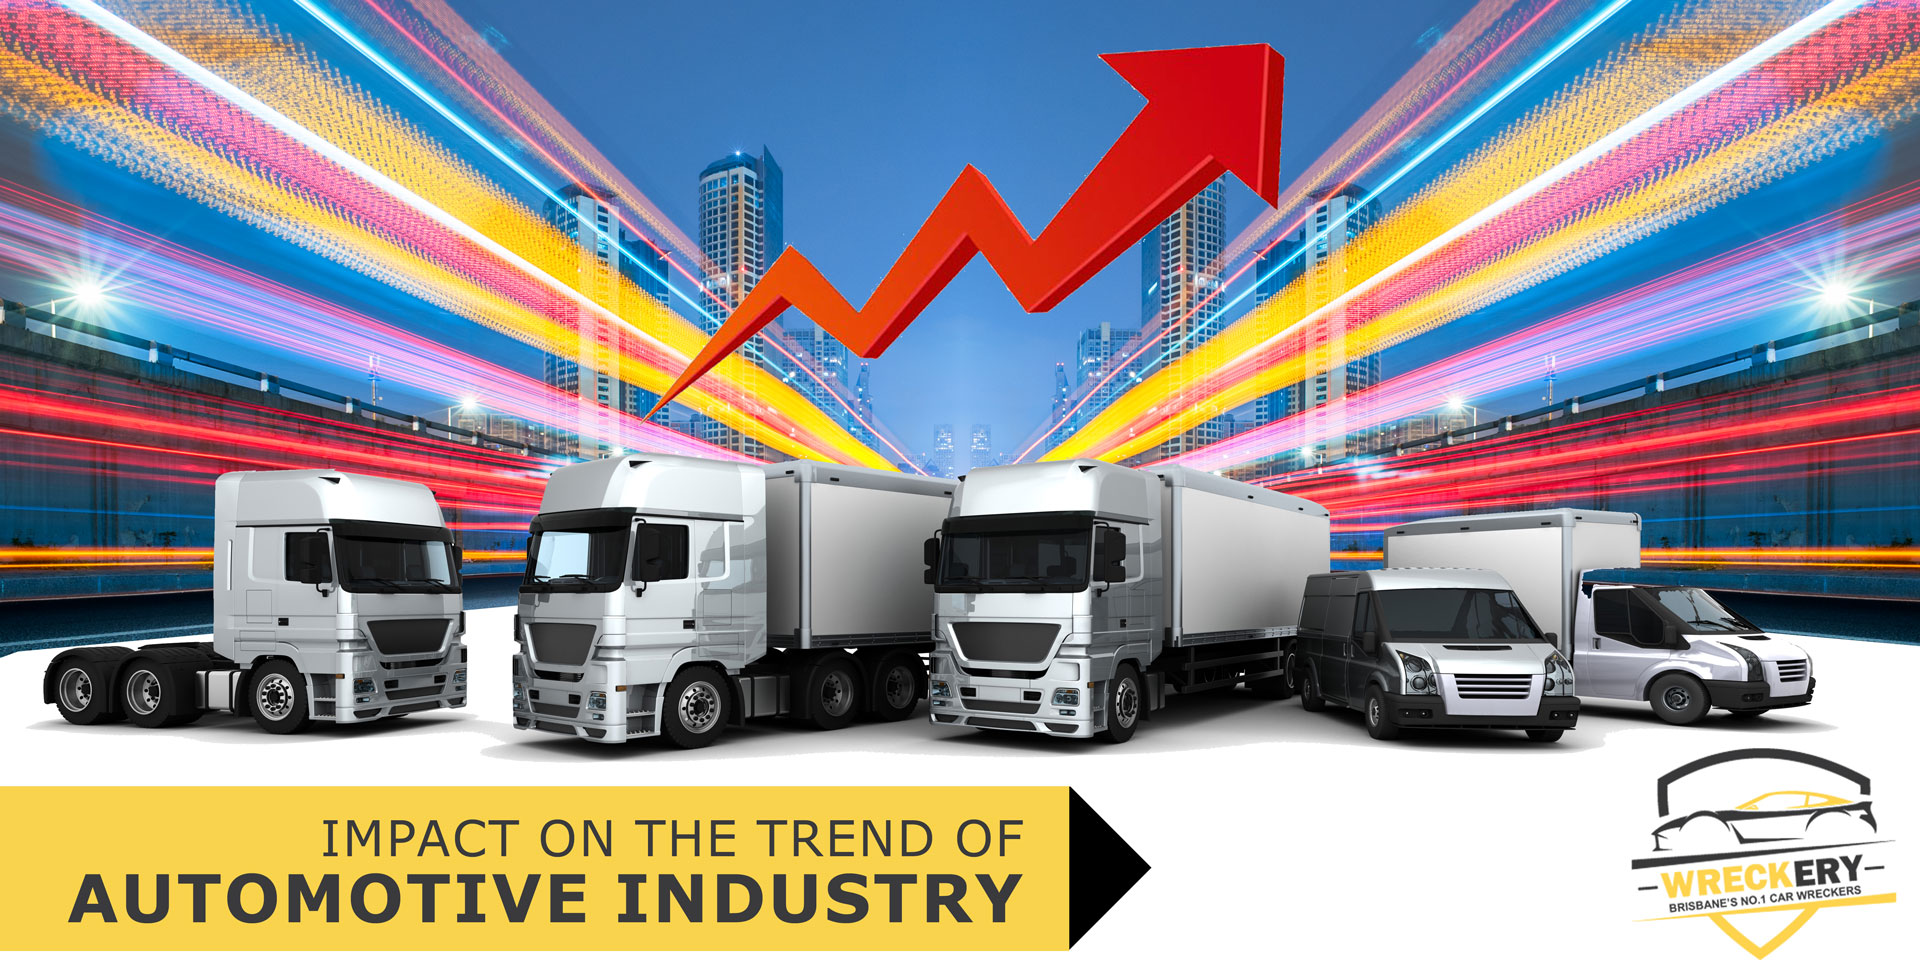 What are the factors that impact on trend of Automotive Industry